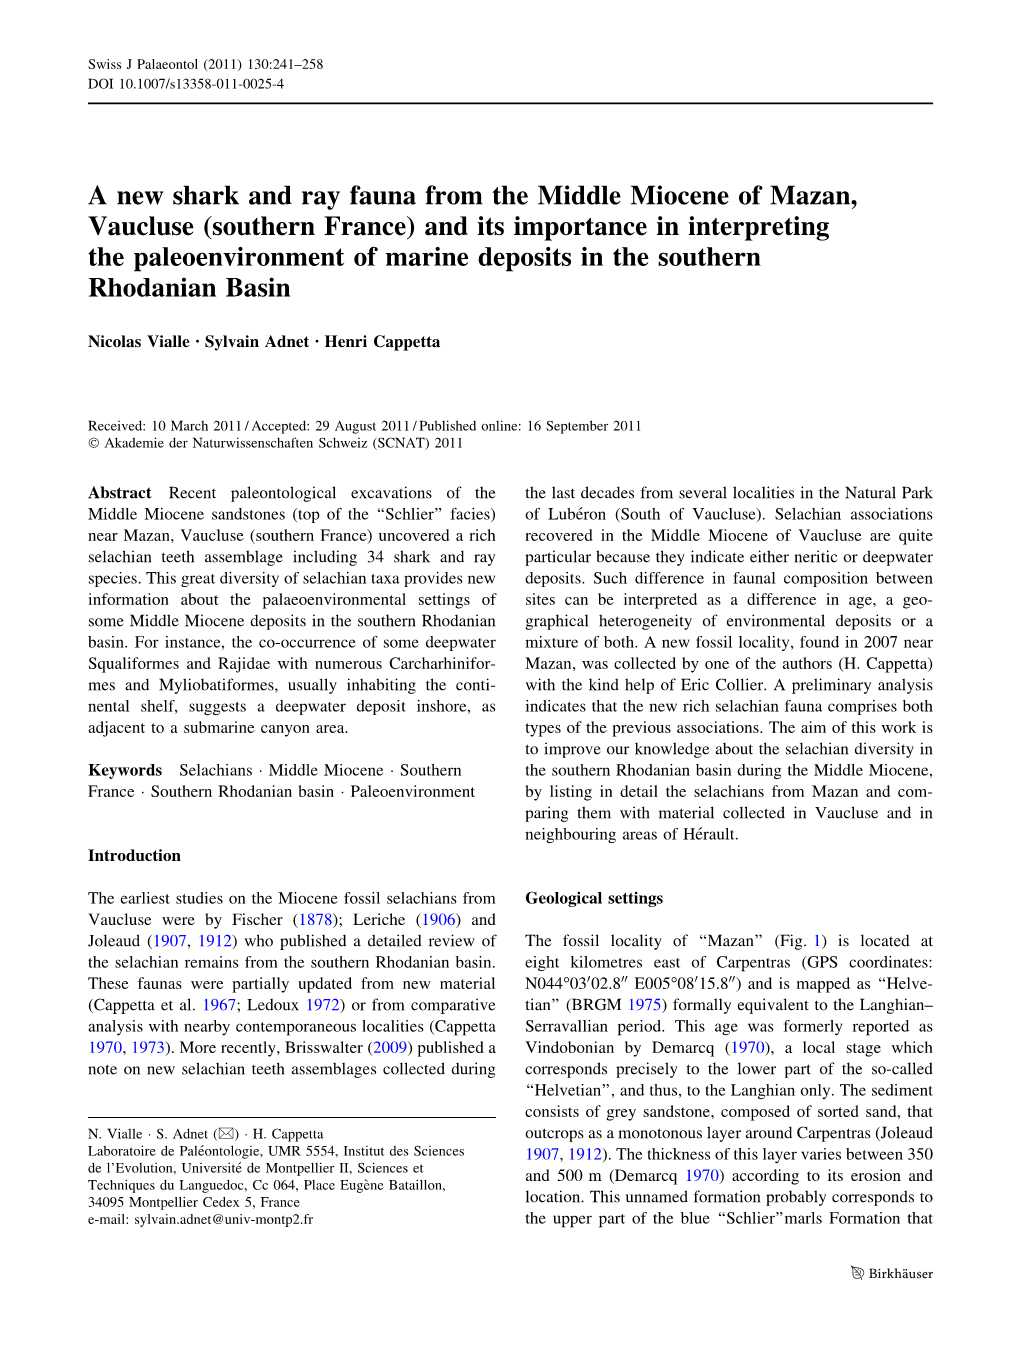 A New Shark and Ray Fauna from the Middle Miocene of Mazan, Vaucluse